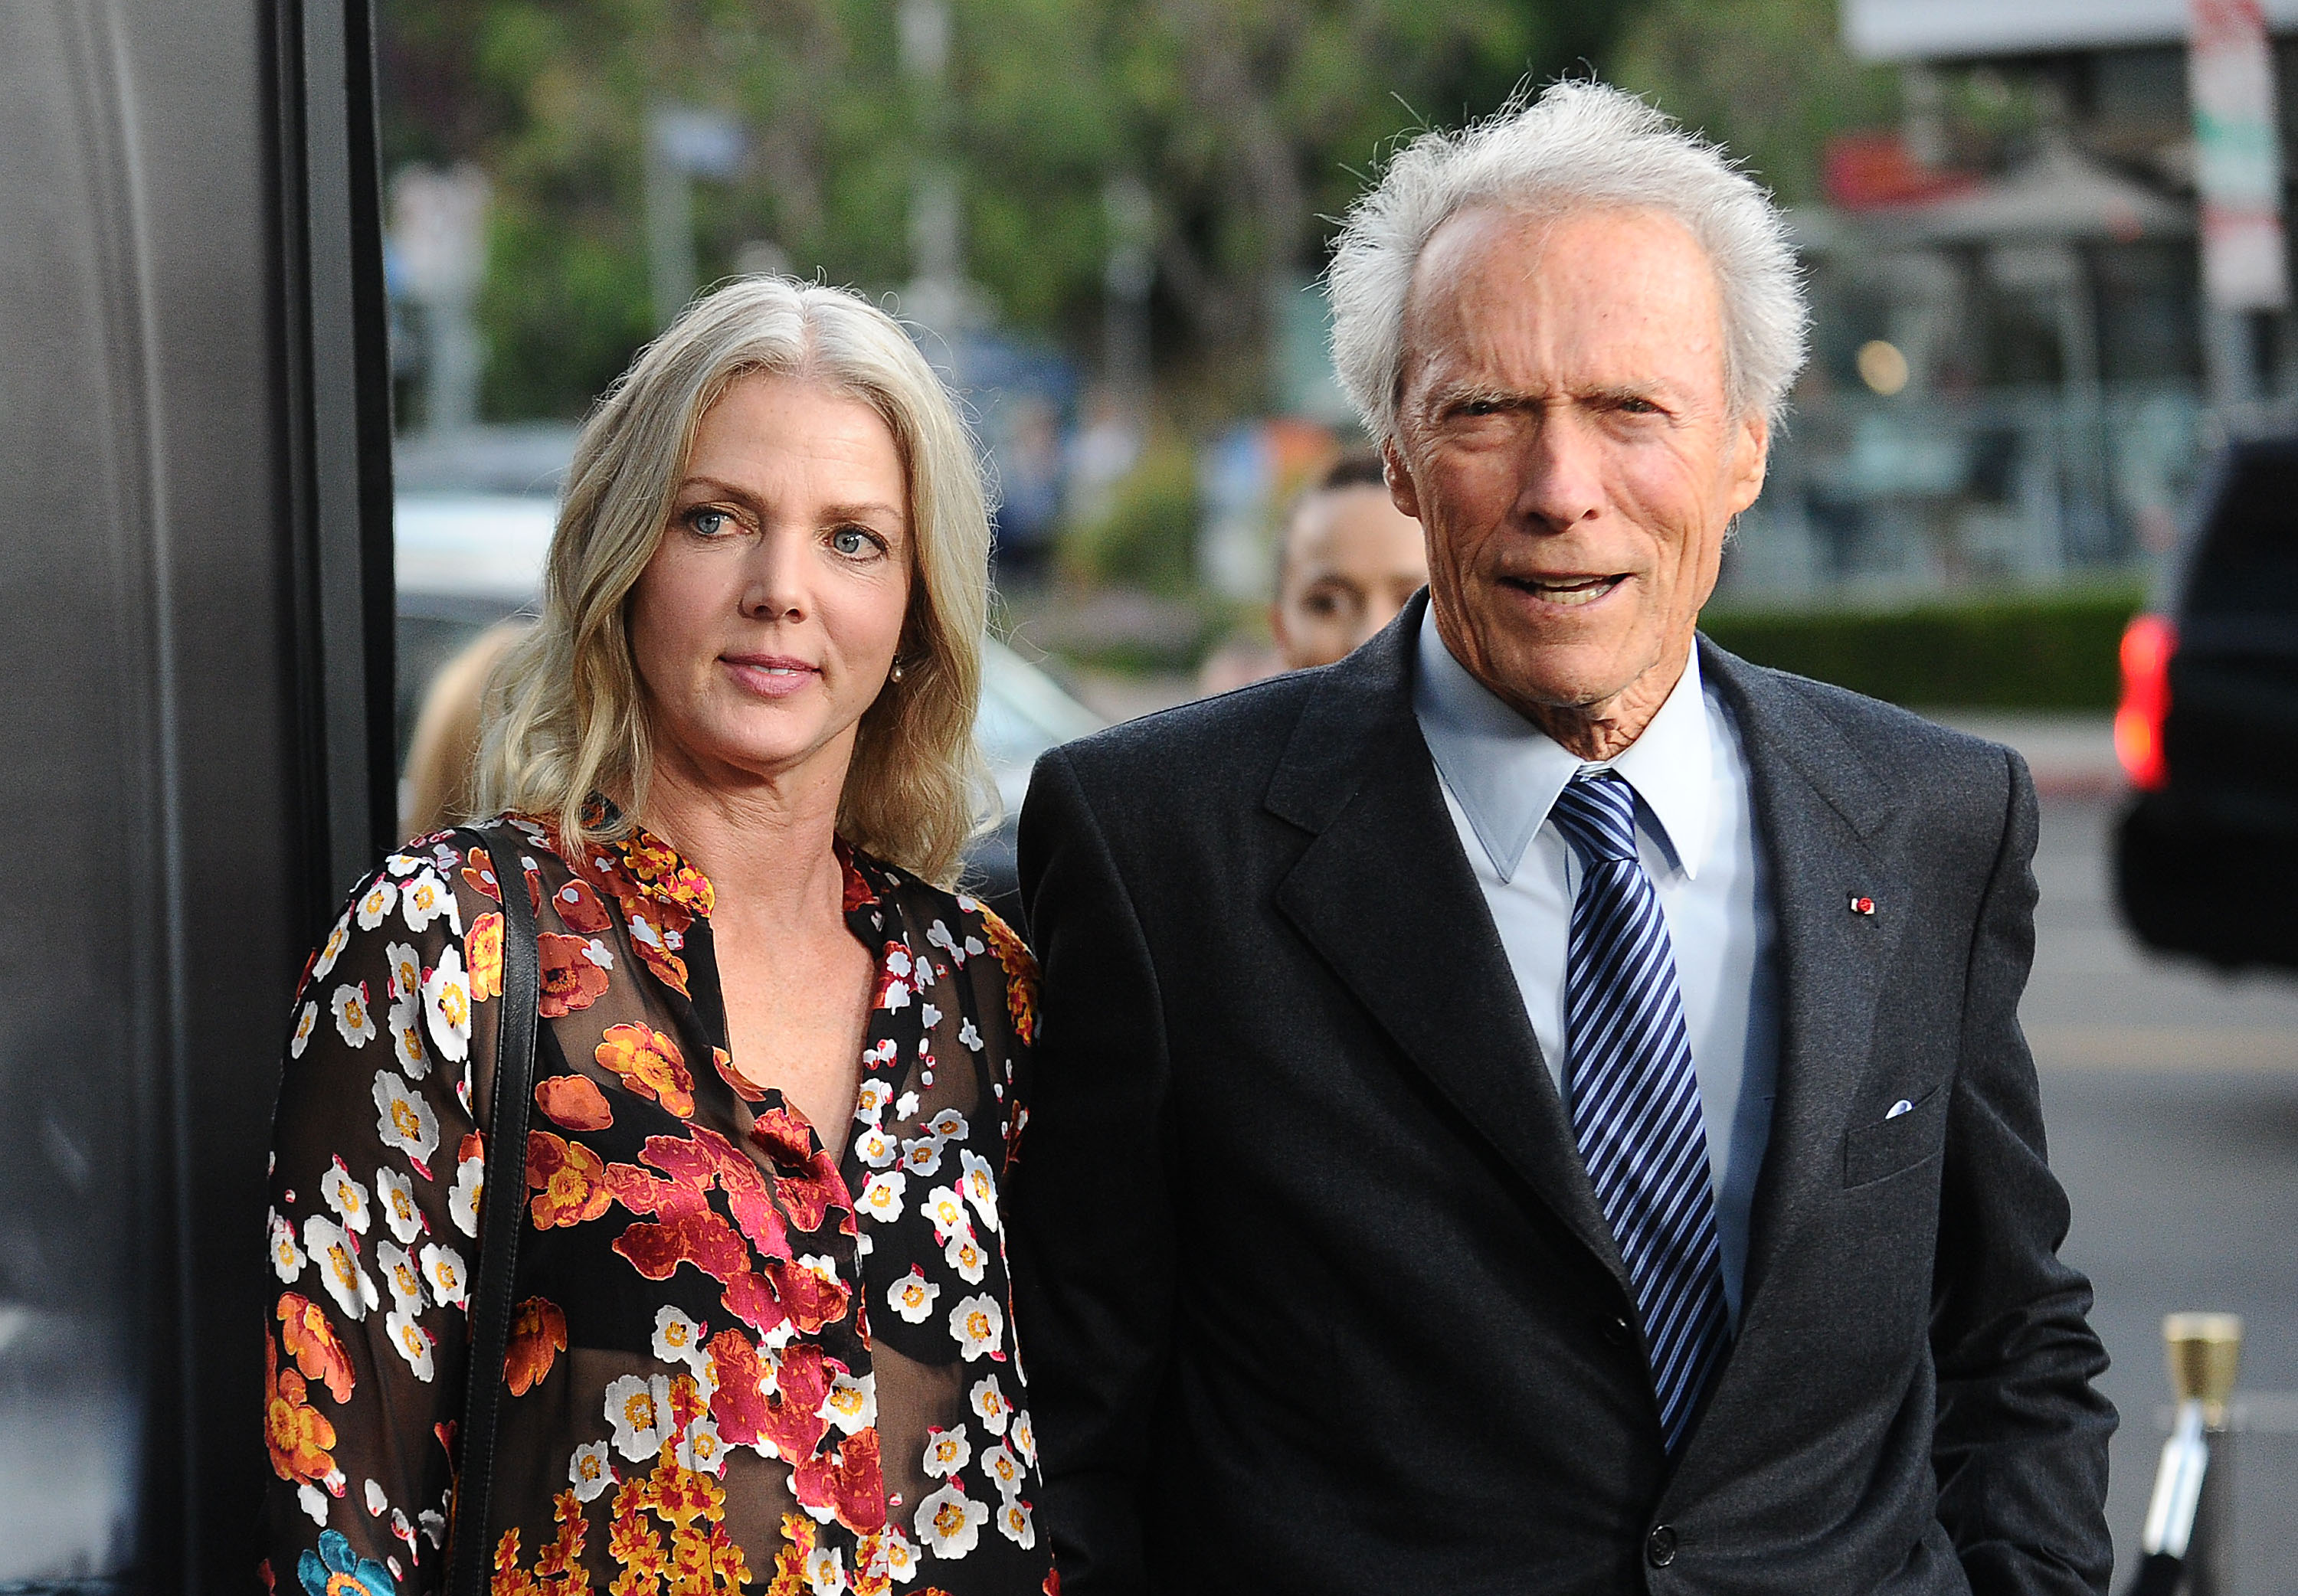 Clint Eastwood and Christina Sandera attend a screening of "Sully" at Directors Guild Of America in Los Angeles, California, on September 8, 2016. | Source: Getty Images